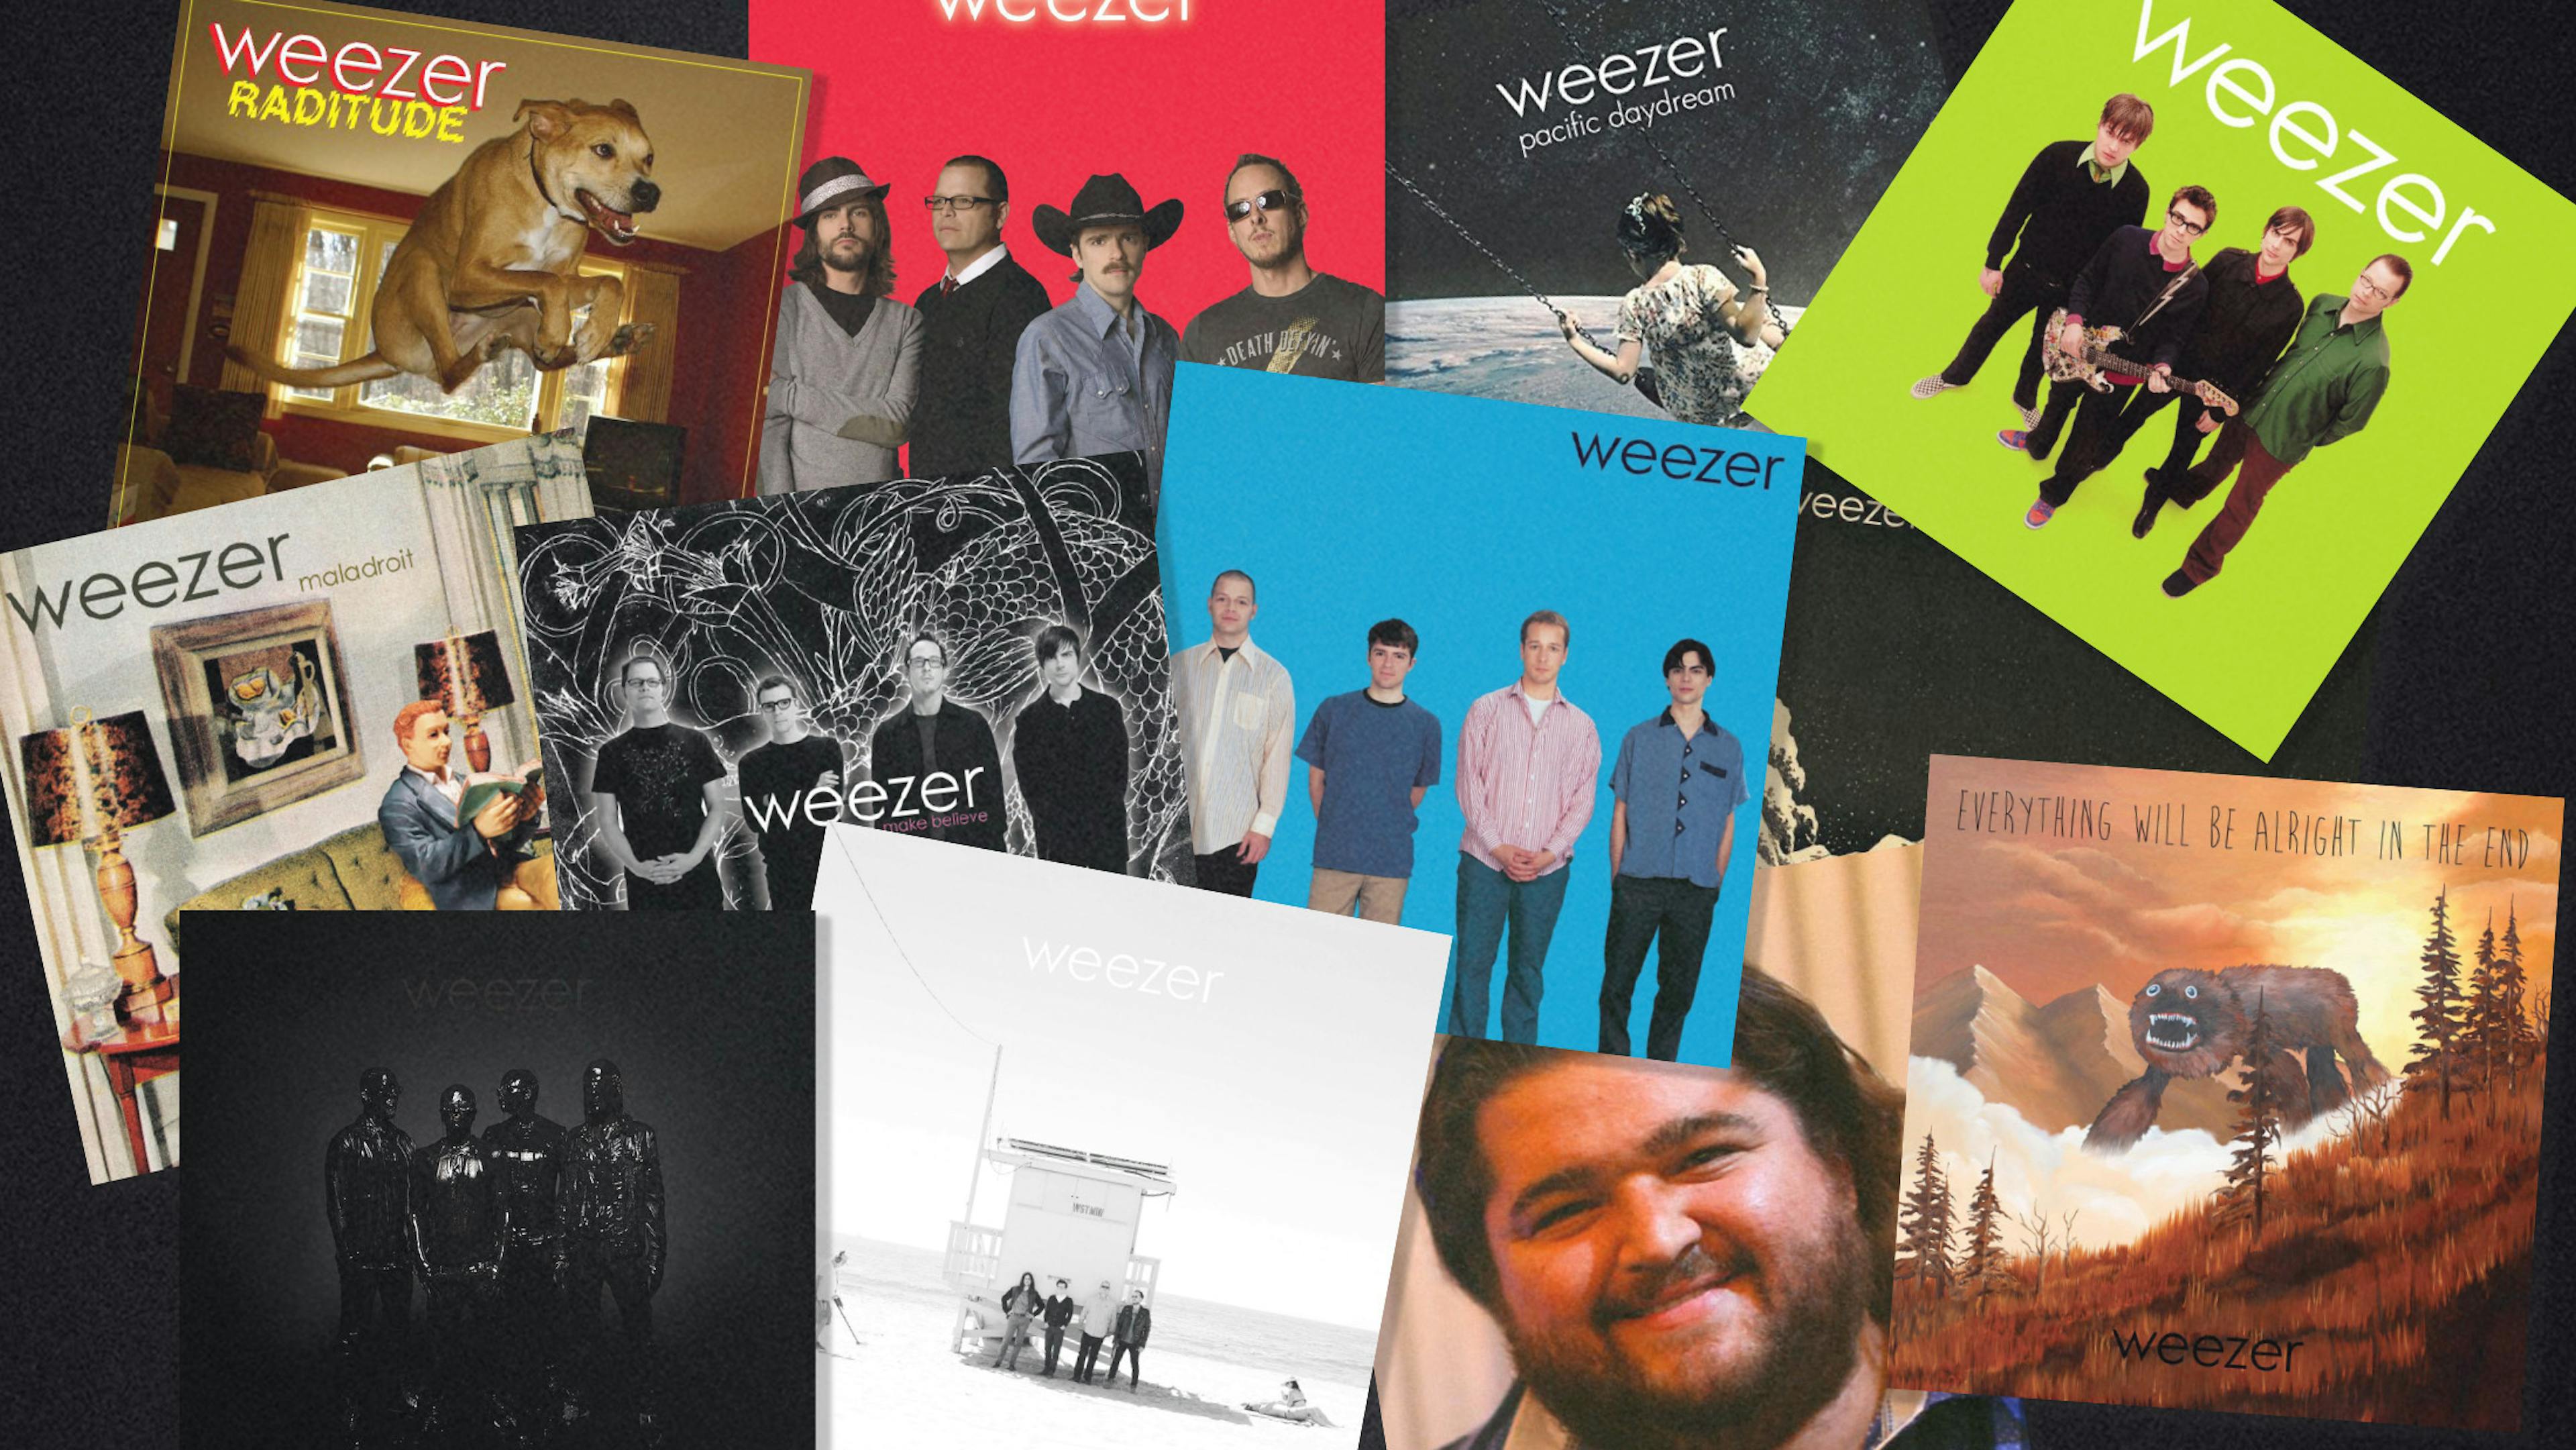 Weezer: Every Album Ranked From Worst To Best